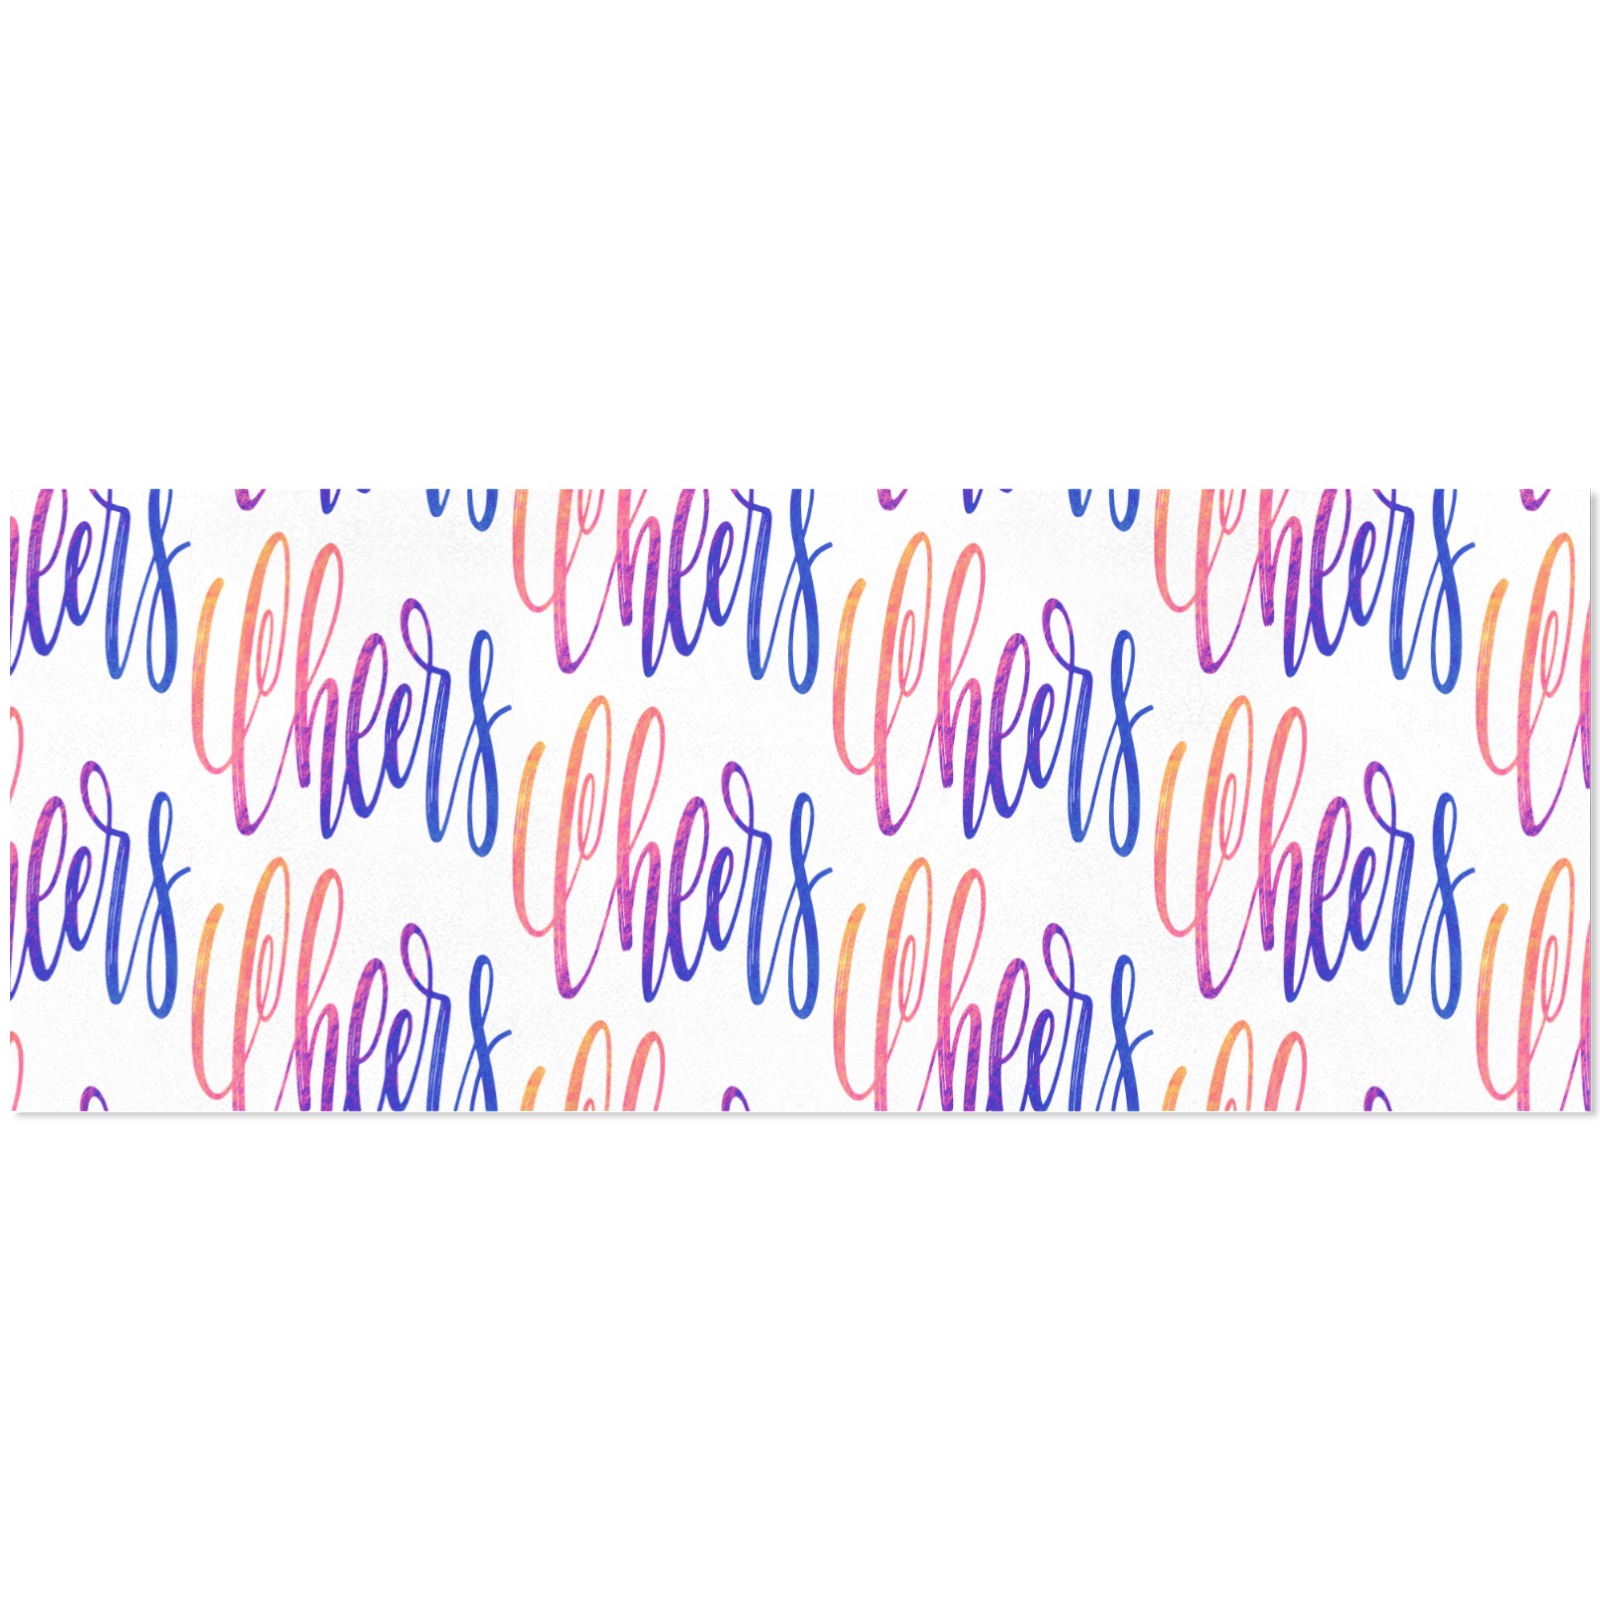 Cheers! Merry Christmas! Gift Wrapping Paper 58"x 23" (4 Rolls)